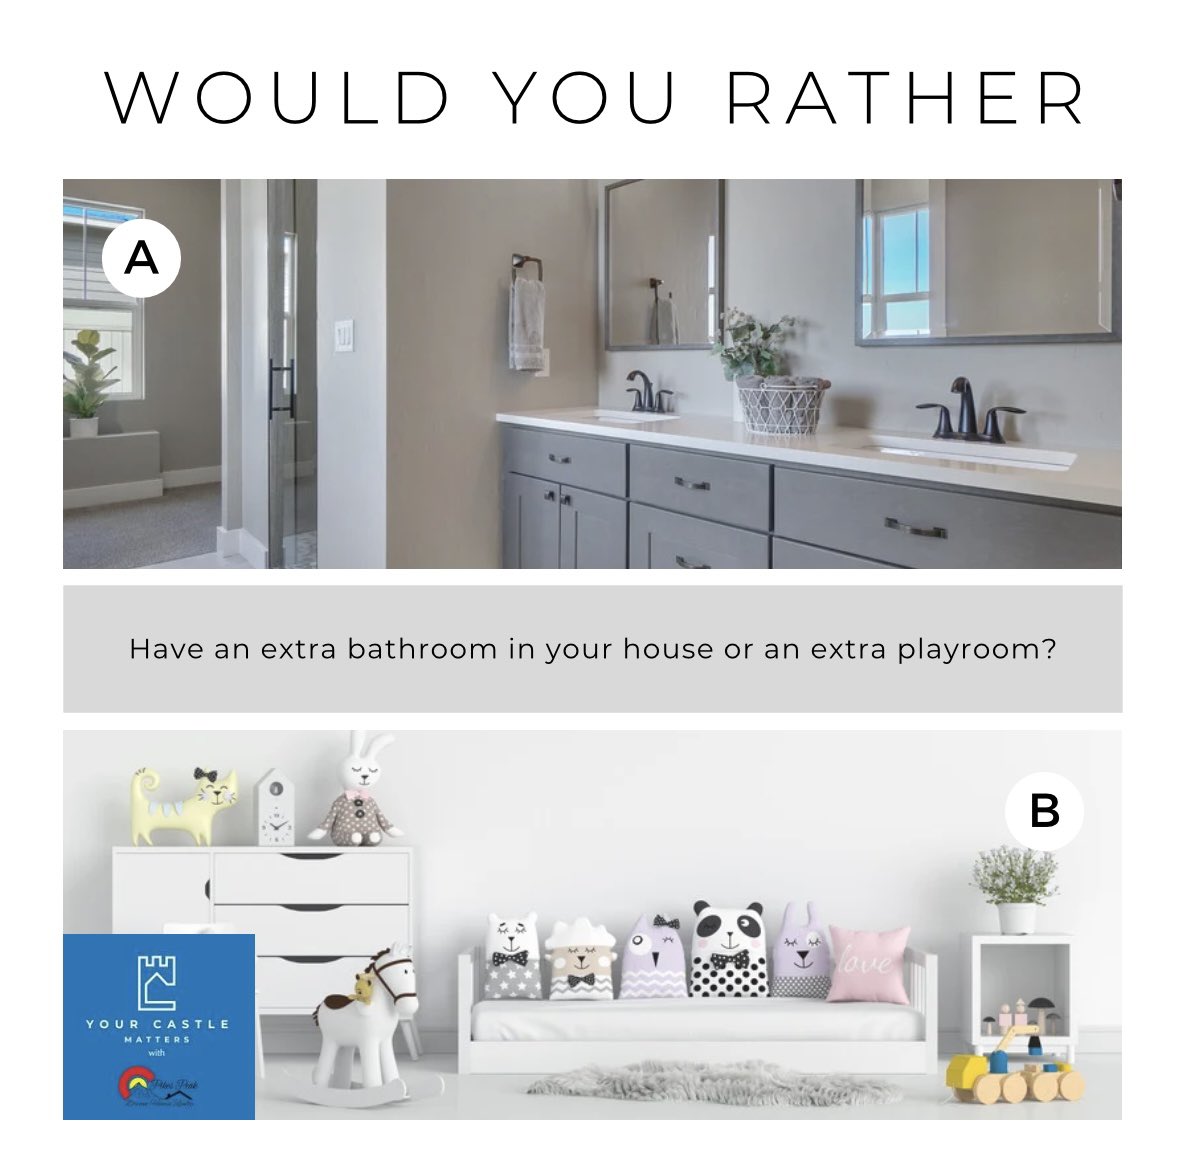 Would you rather have an extra bathroom or a playroom in your house? Both options can add value to your home, but I want to know which one you would prefer. Leave a comment below. #yourcastlematters #providing4providers #coloradoliving #investinyou #homesweethome #Godisgood